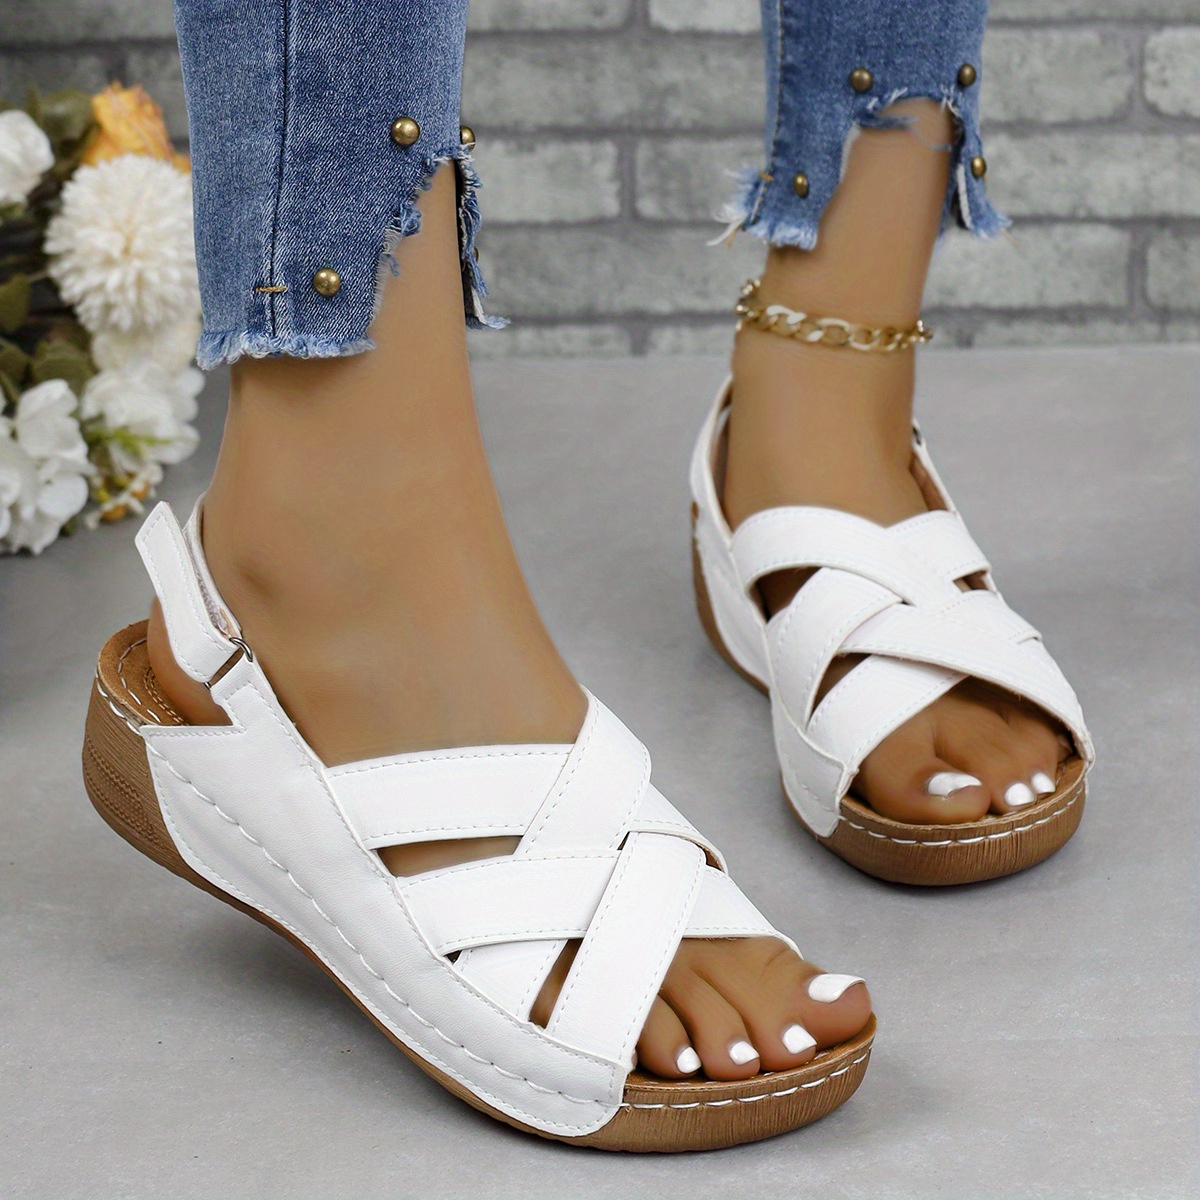 

Women's Solid Color Wedge Heeled Sandals, Casual Open Toe Summer Shoes, Comfortable Ankle Strap Sandals